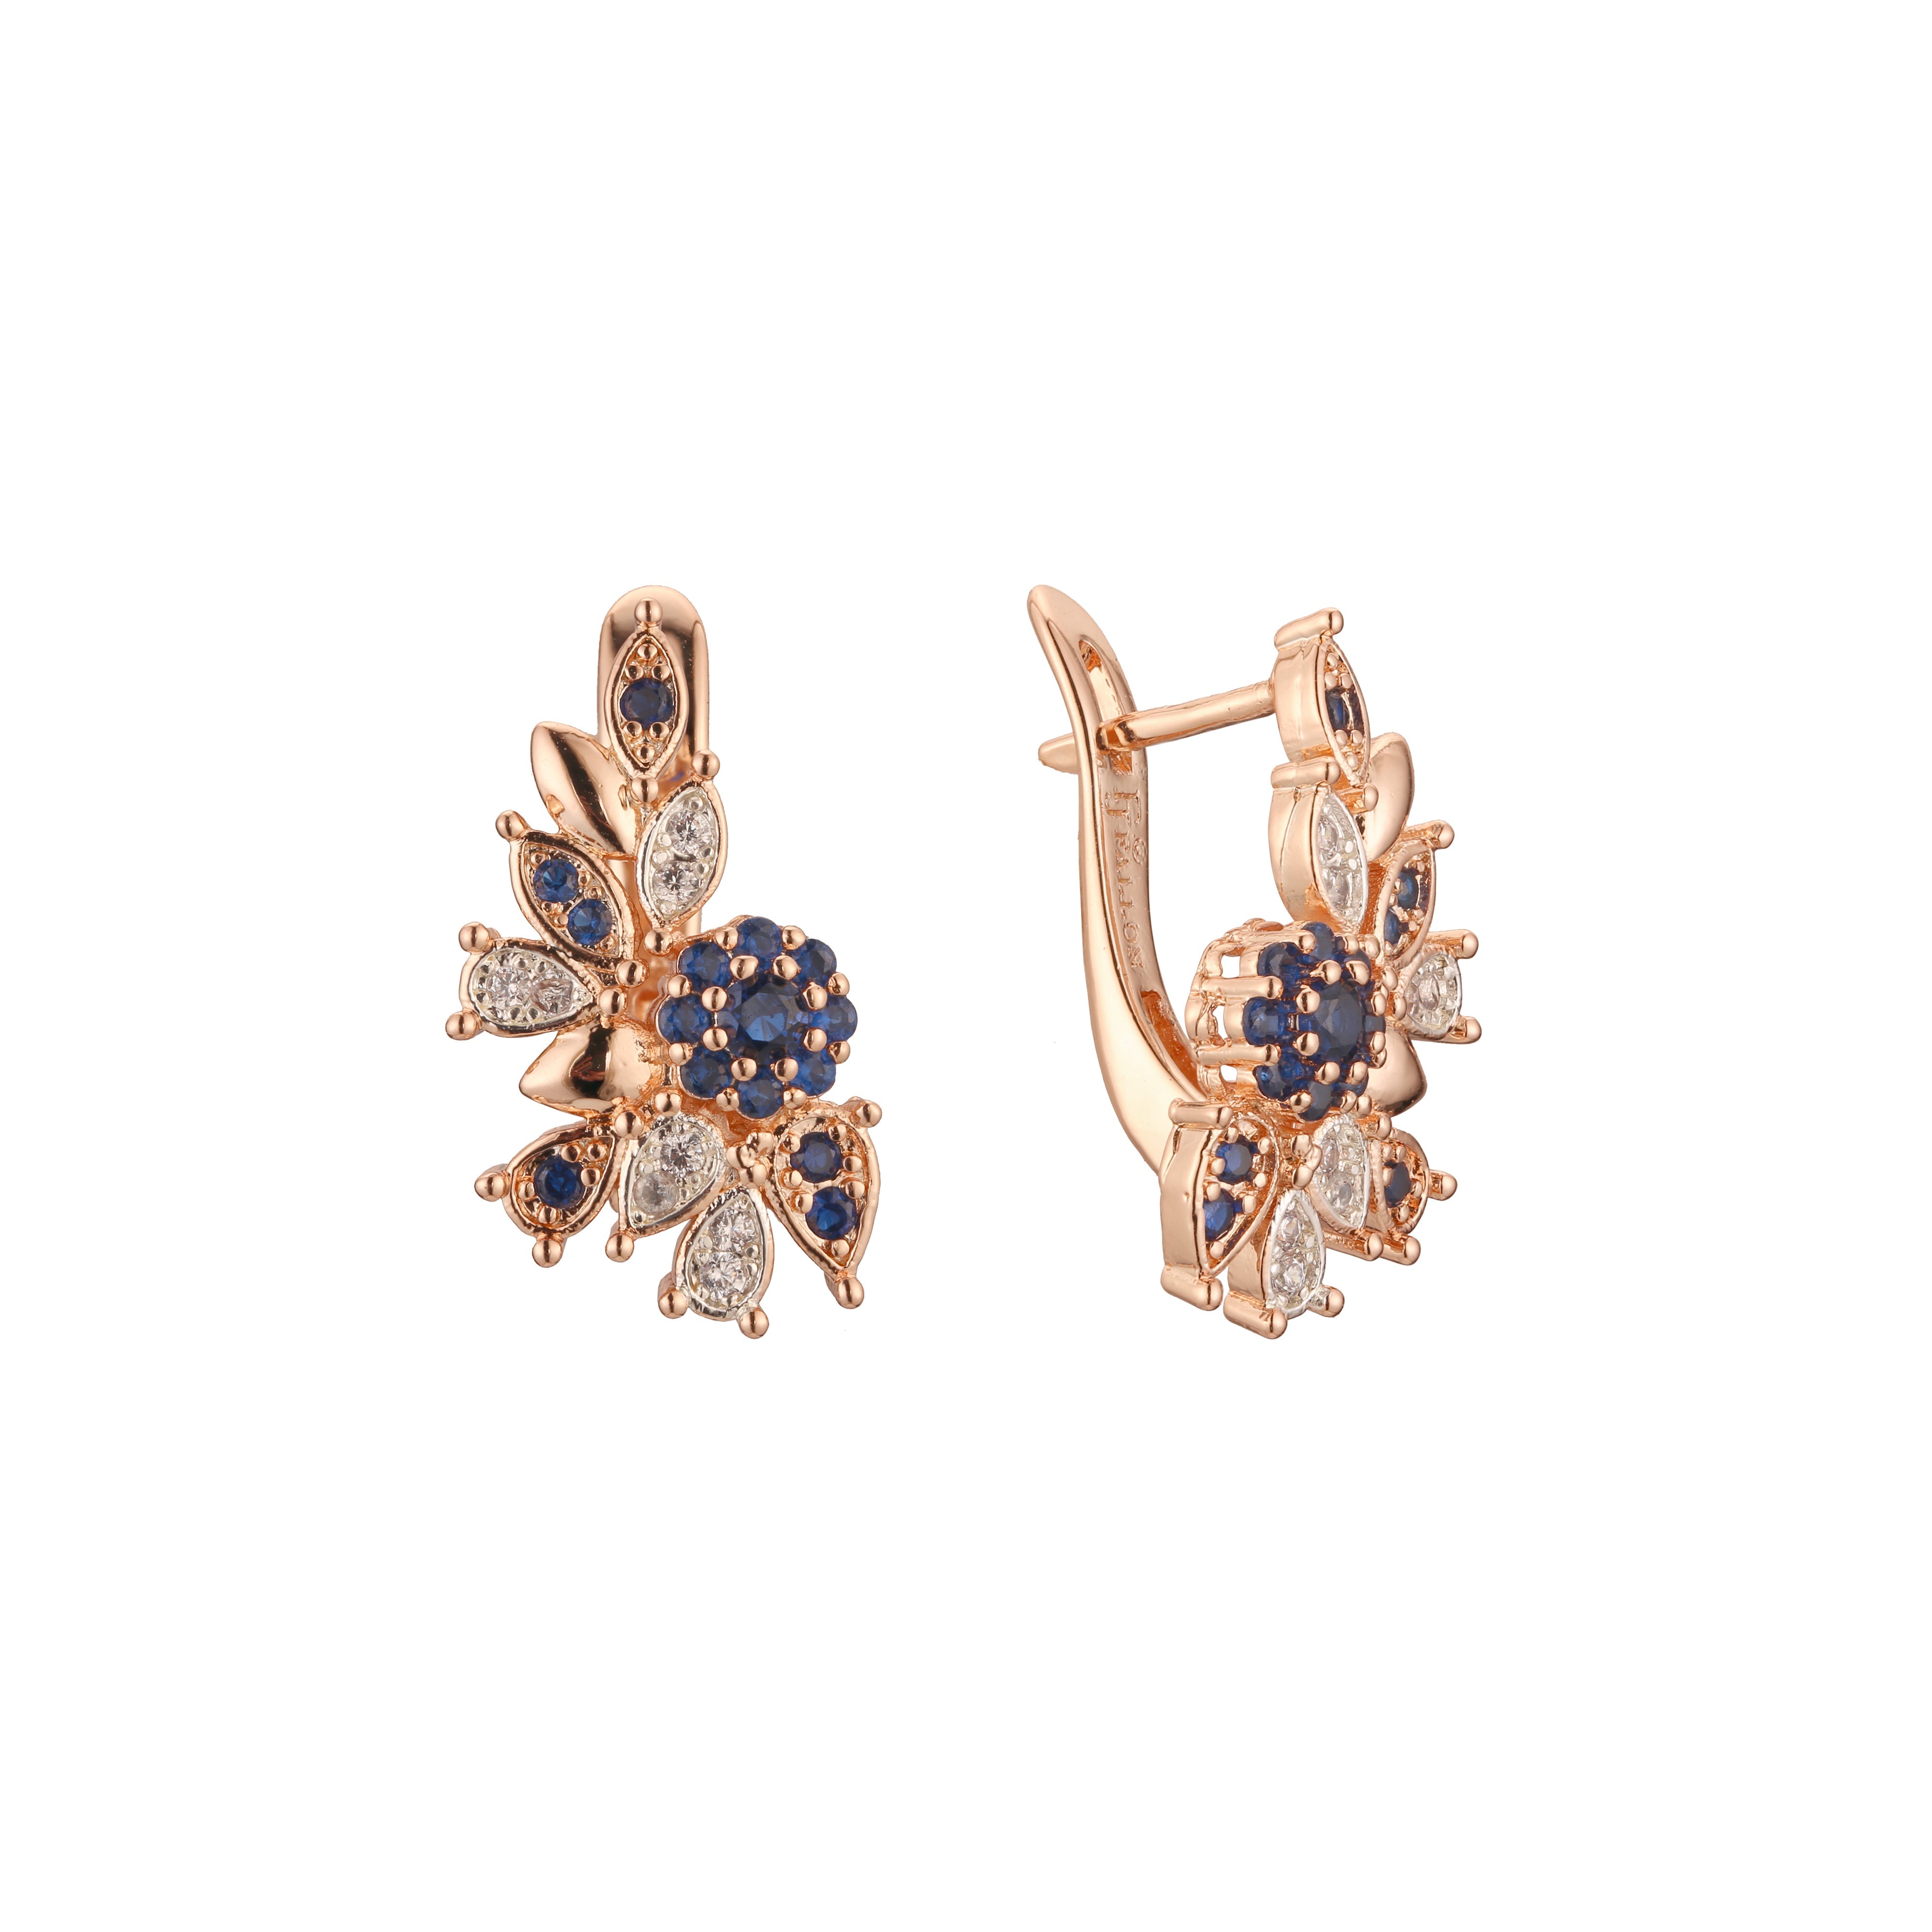 Luxurious cluster leaves earrings in 14K Gold, Rose Gold, two tone plating colors